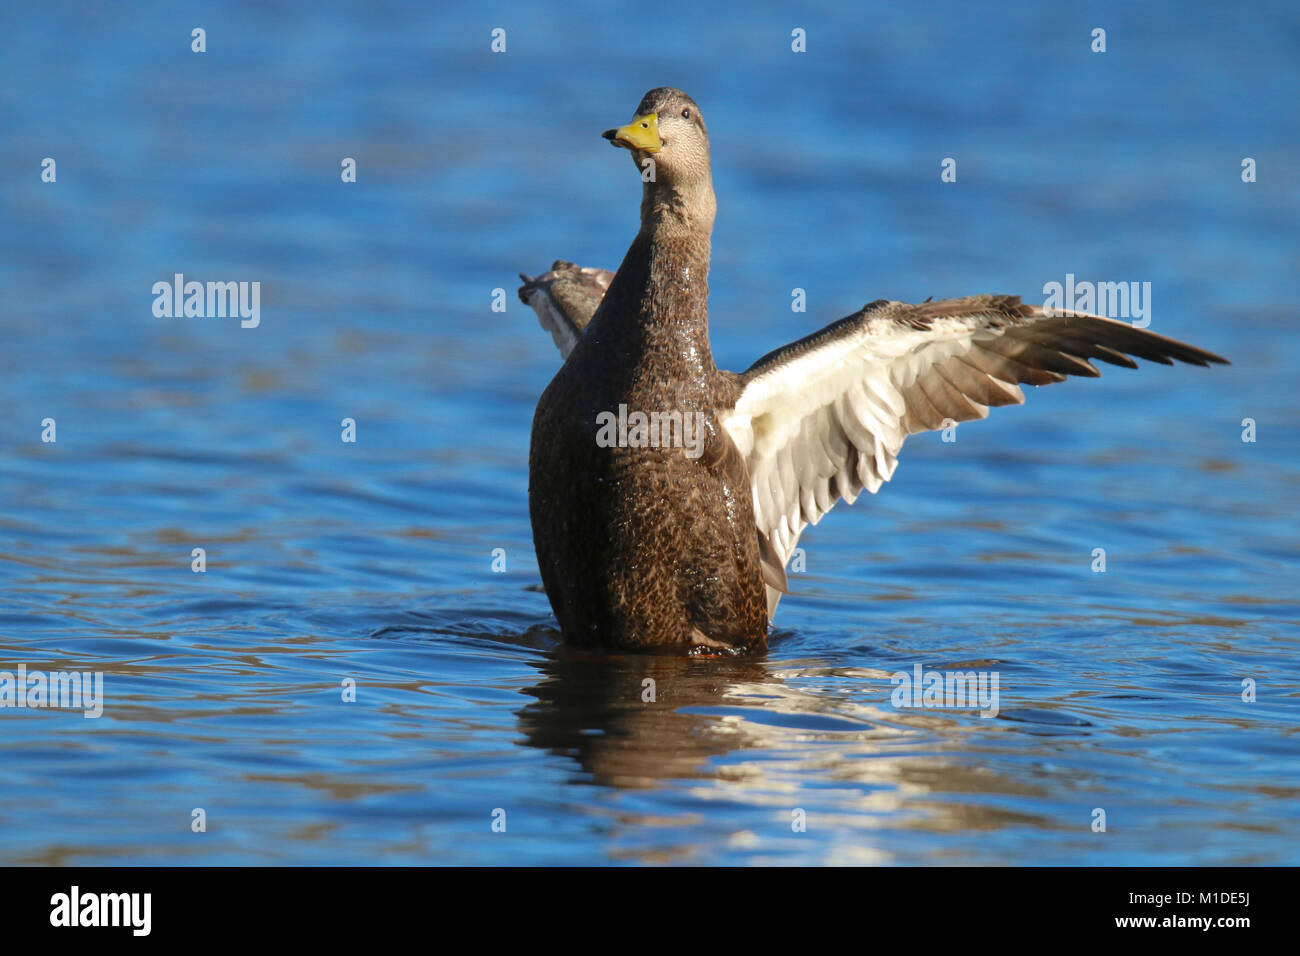 A male American black duck Anas rubripes flapping his wings on a blue lake. Stock Photo